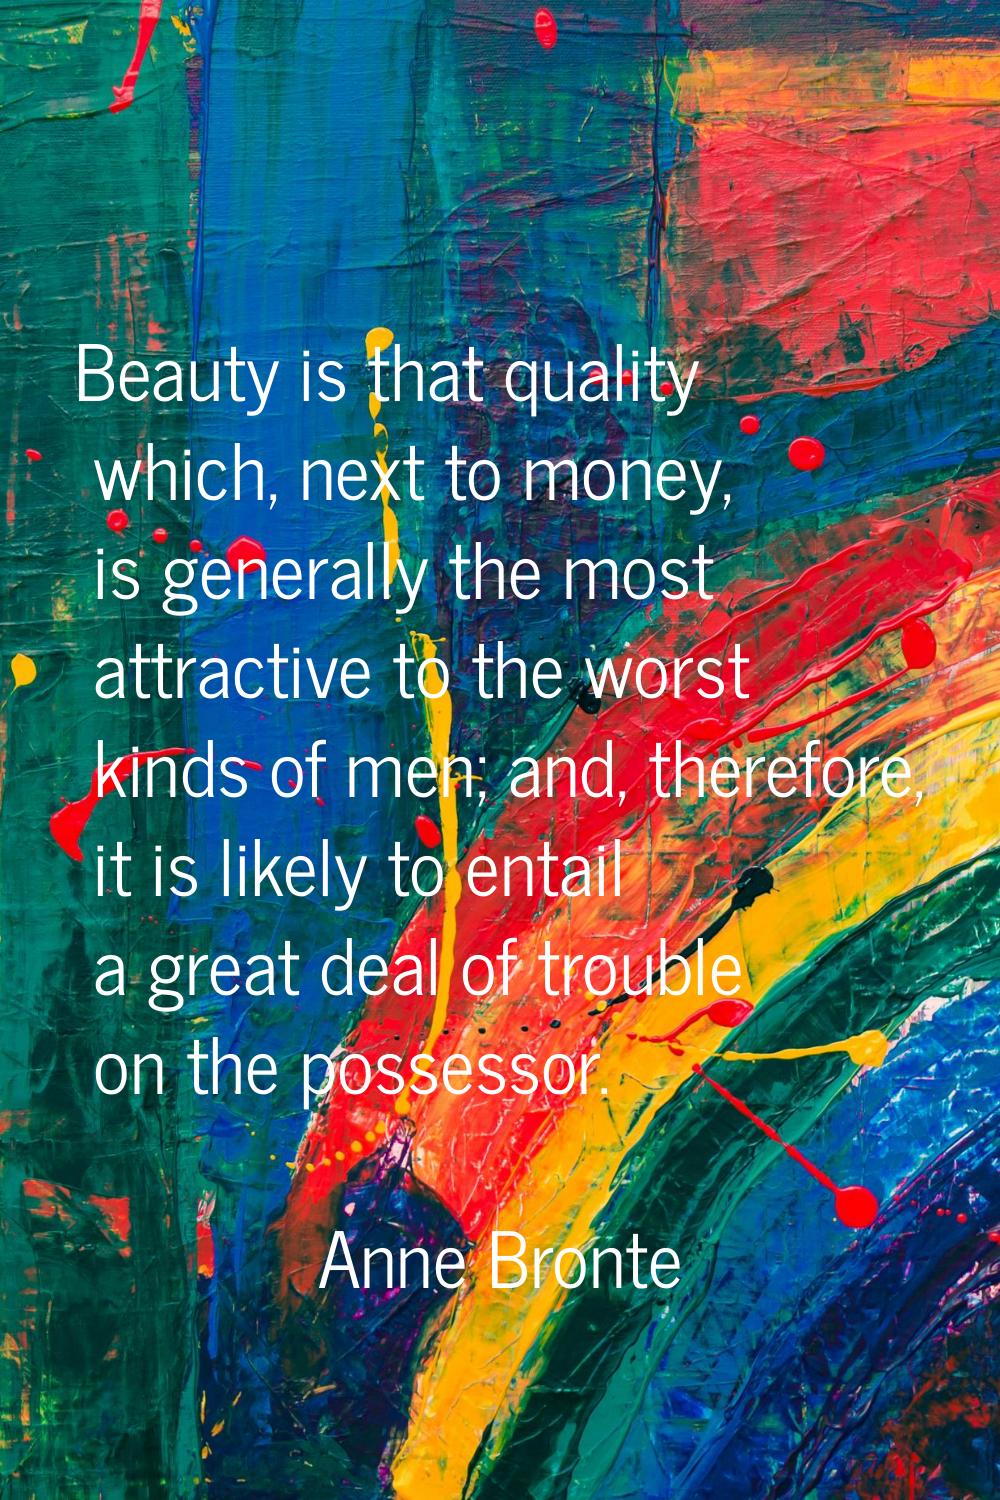 Beauty is that quality which, next to money, is generally the most attractive to the worst kinds of